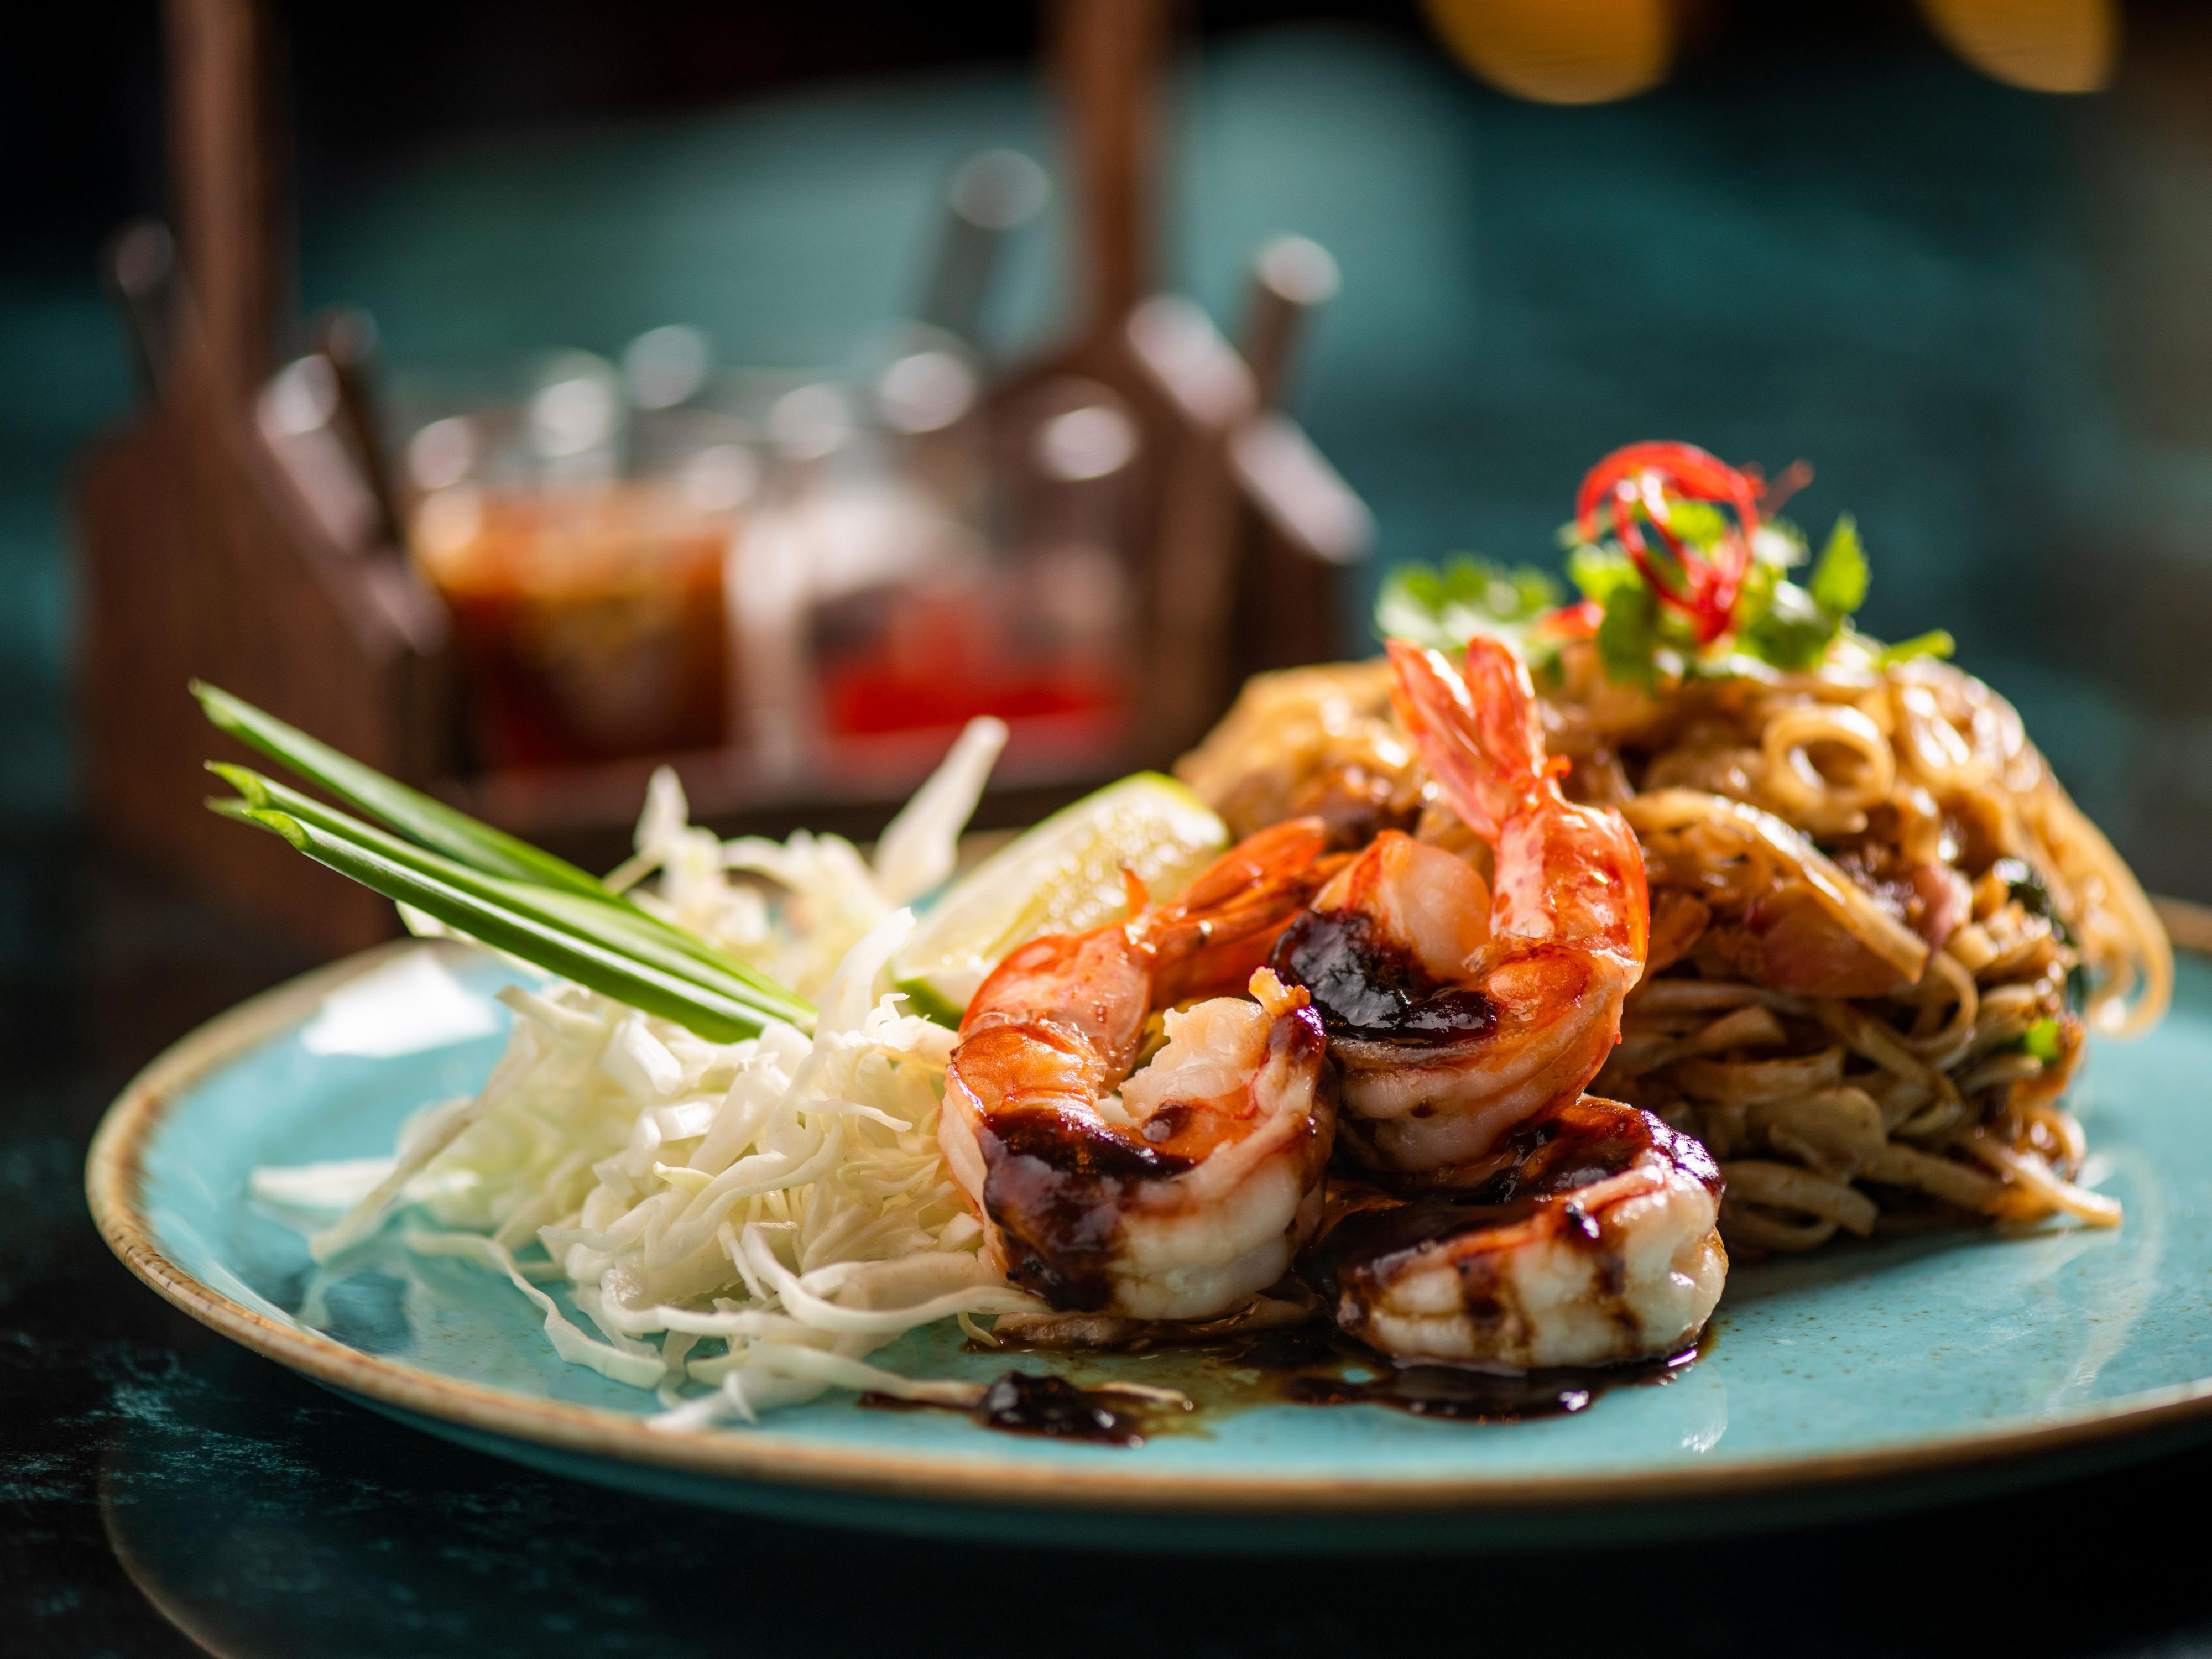 Join us on a magical journey of mystical influence and savor delectable native flavors of Thai cuisine. Enjoy the unique outdoor seating adding authenticity to this fascinating dining experience.